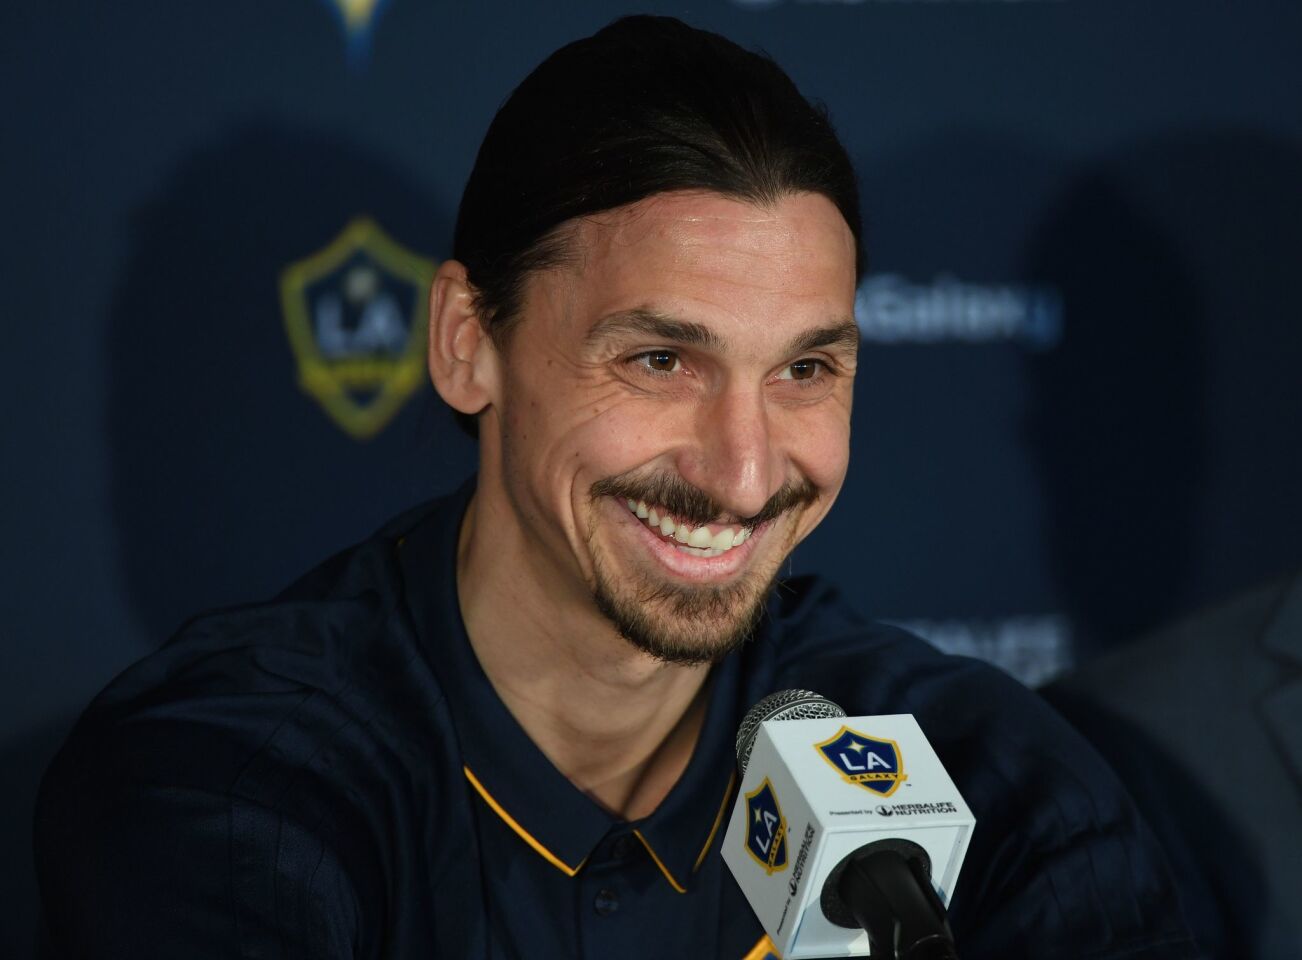 LA Galaxy footballer Zlatan Ibrahimovic speaks during his first press conference for the club in Los Angeles, California, on March 30, 2018. The 36-year-old Swedish striker's move to MLS from Manchester United was confirmed last week, with Ibrahimovic swiftly vowing to reignite the Galaxy's fortunes after they finished bottom of the league last season. / AFP PHOTO / Mark RalstonMARK RALSTON/AFP/Getty Images ** OUTS - ELSENT, FPG, CM - OUTS * NM, PH, VA if sourced by CT, LA or MoD **